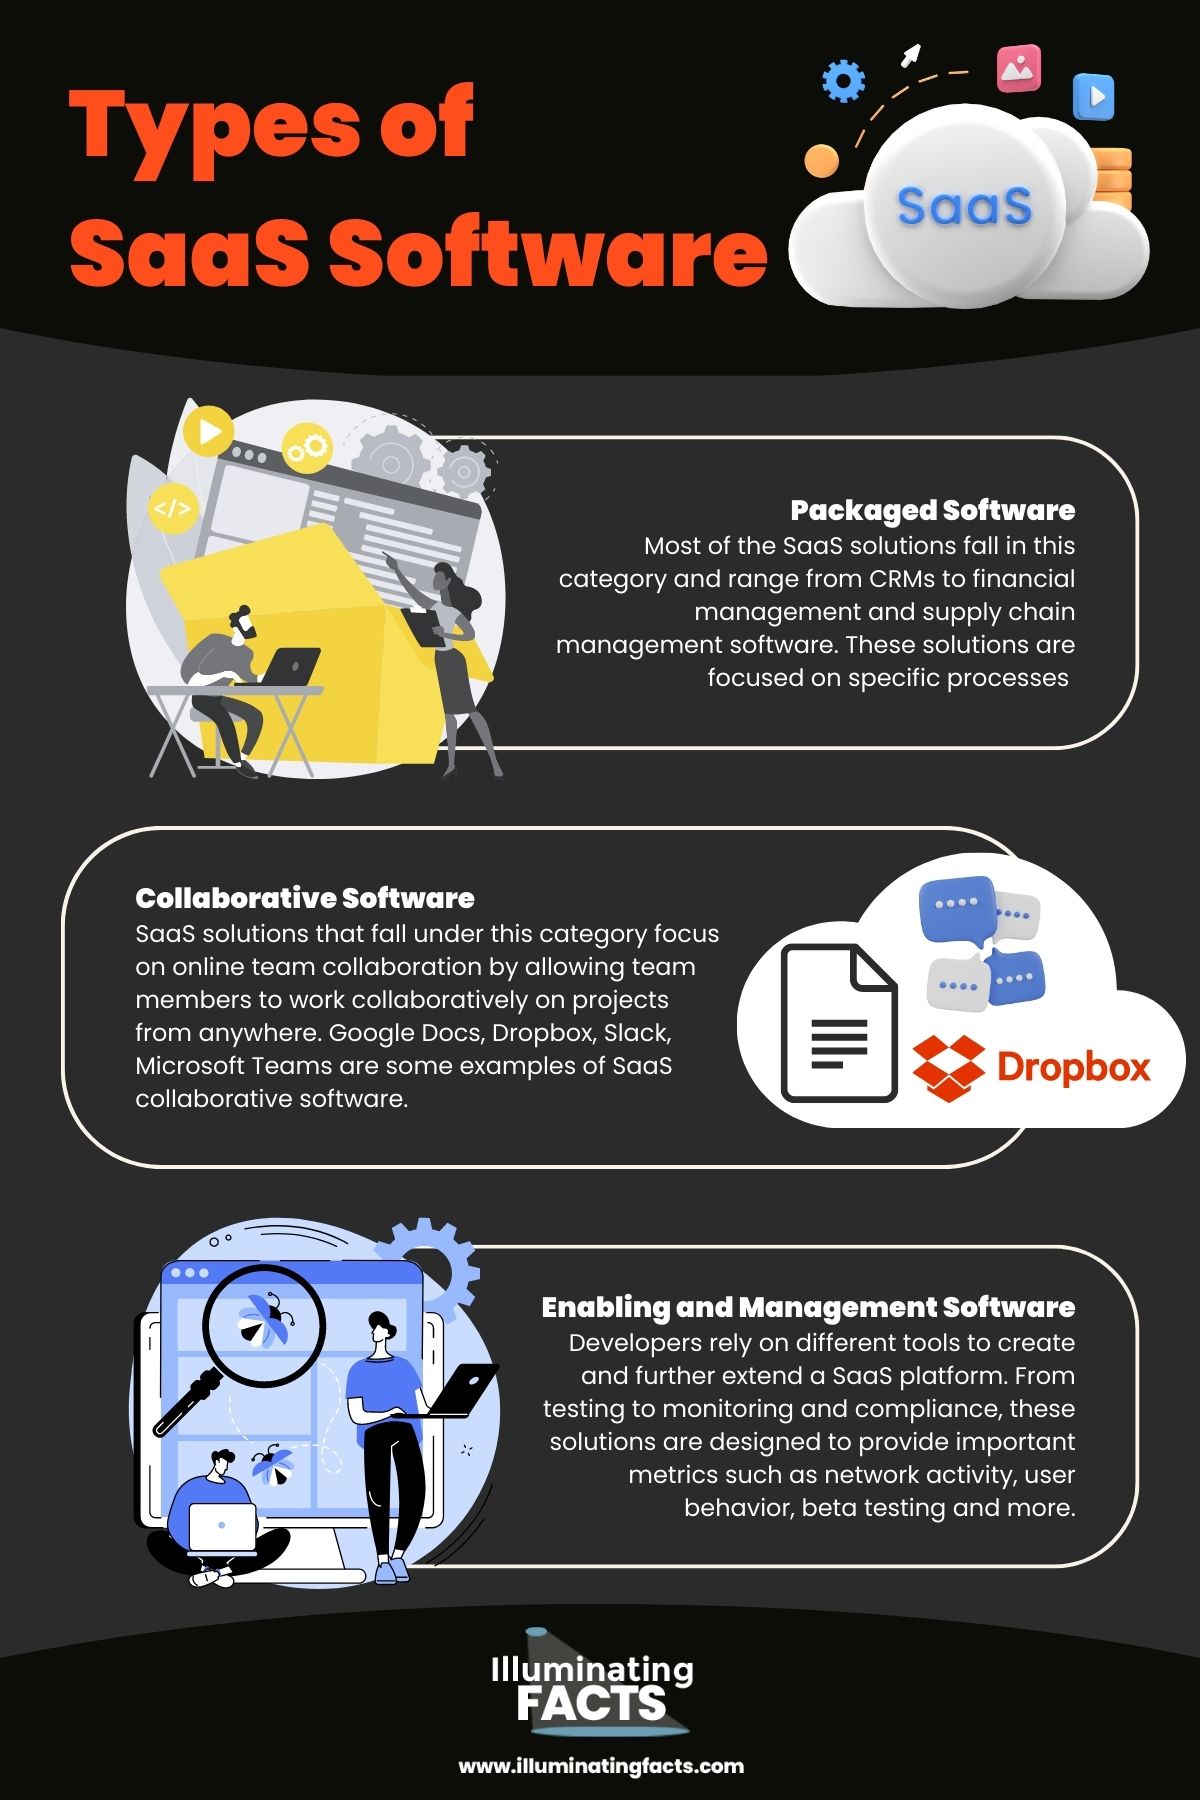 An infographic about some of the different types of SaaS software